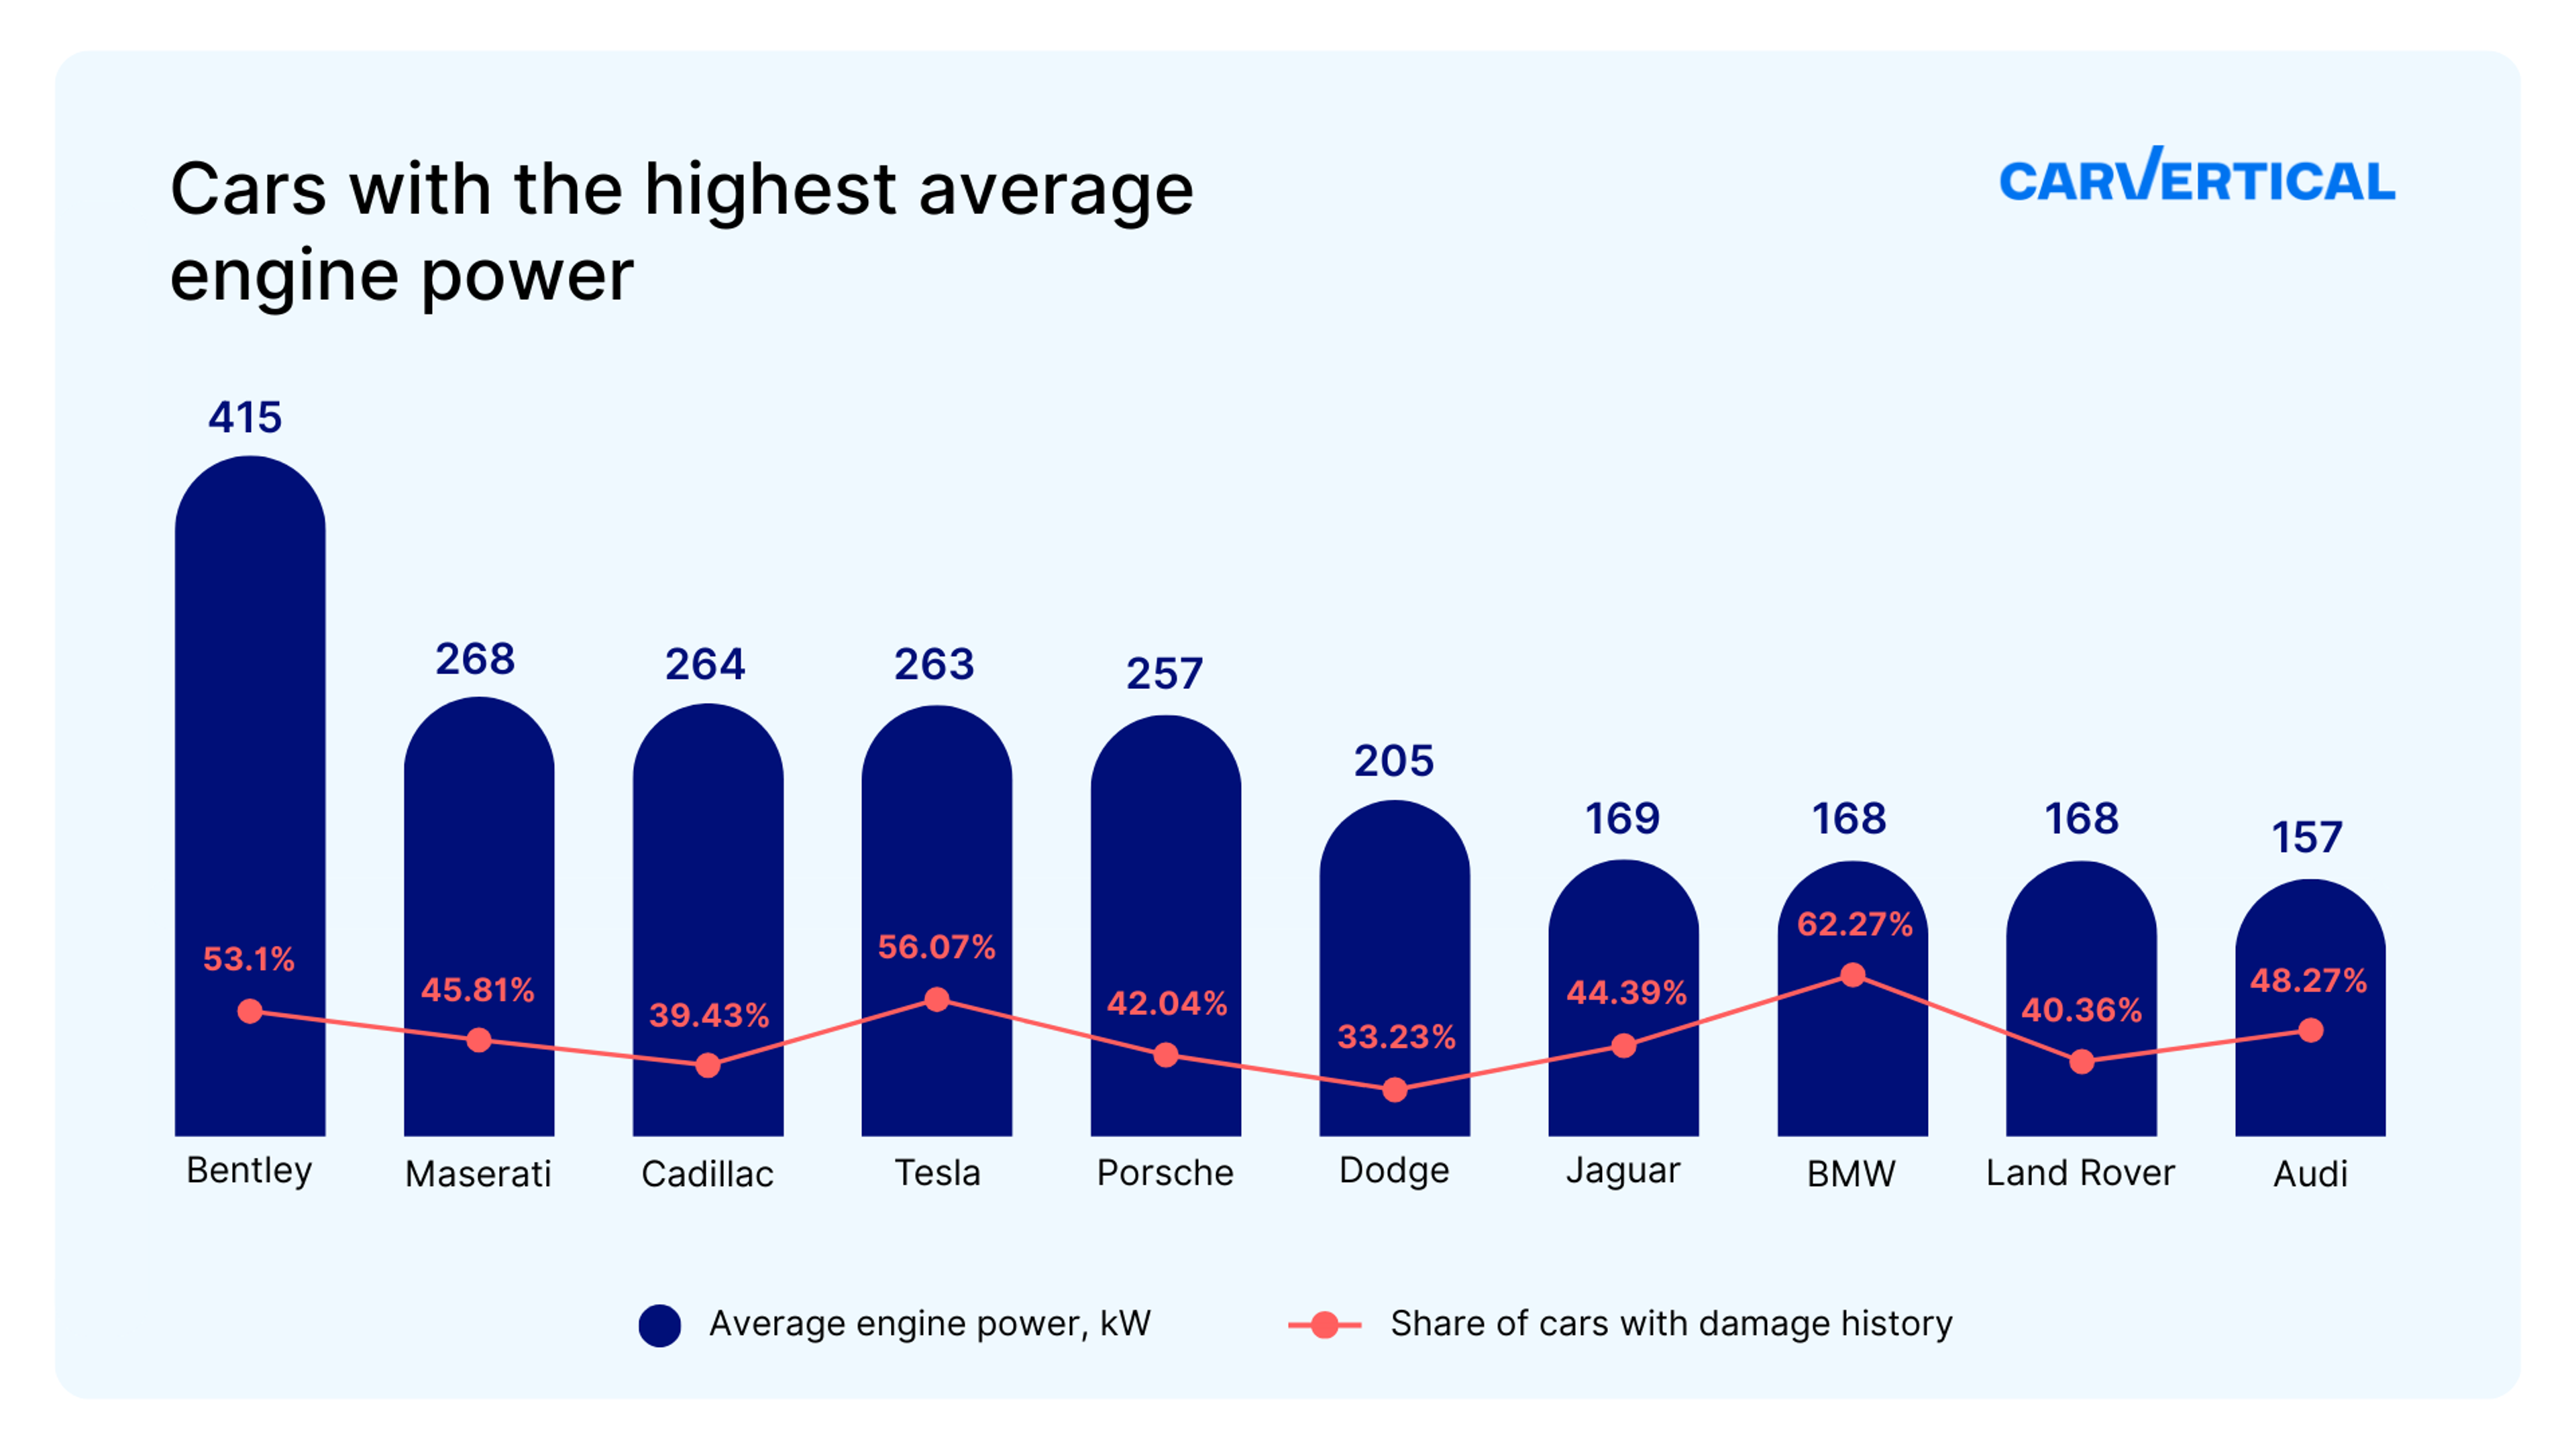 Cars with the highest average engine power vs damage rates